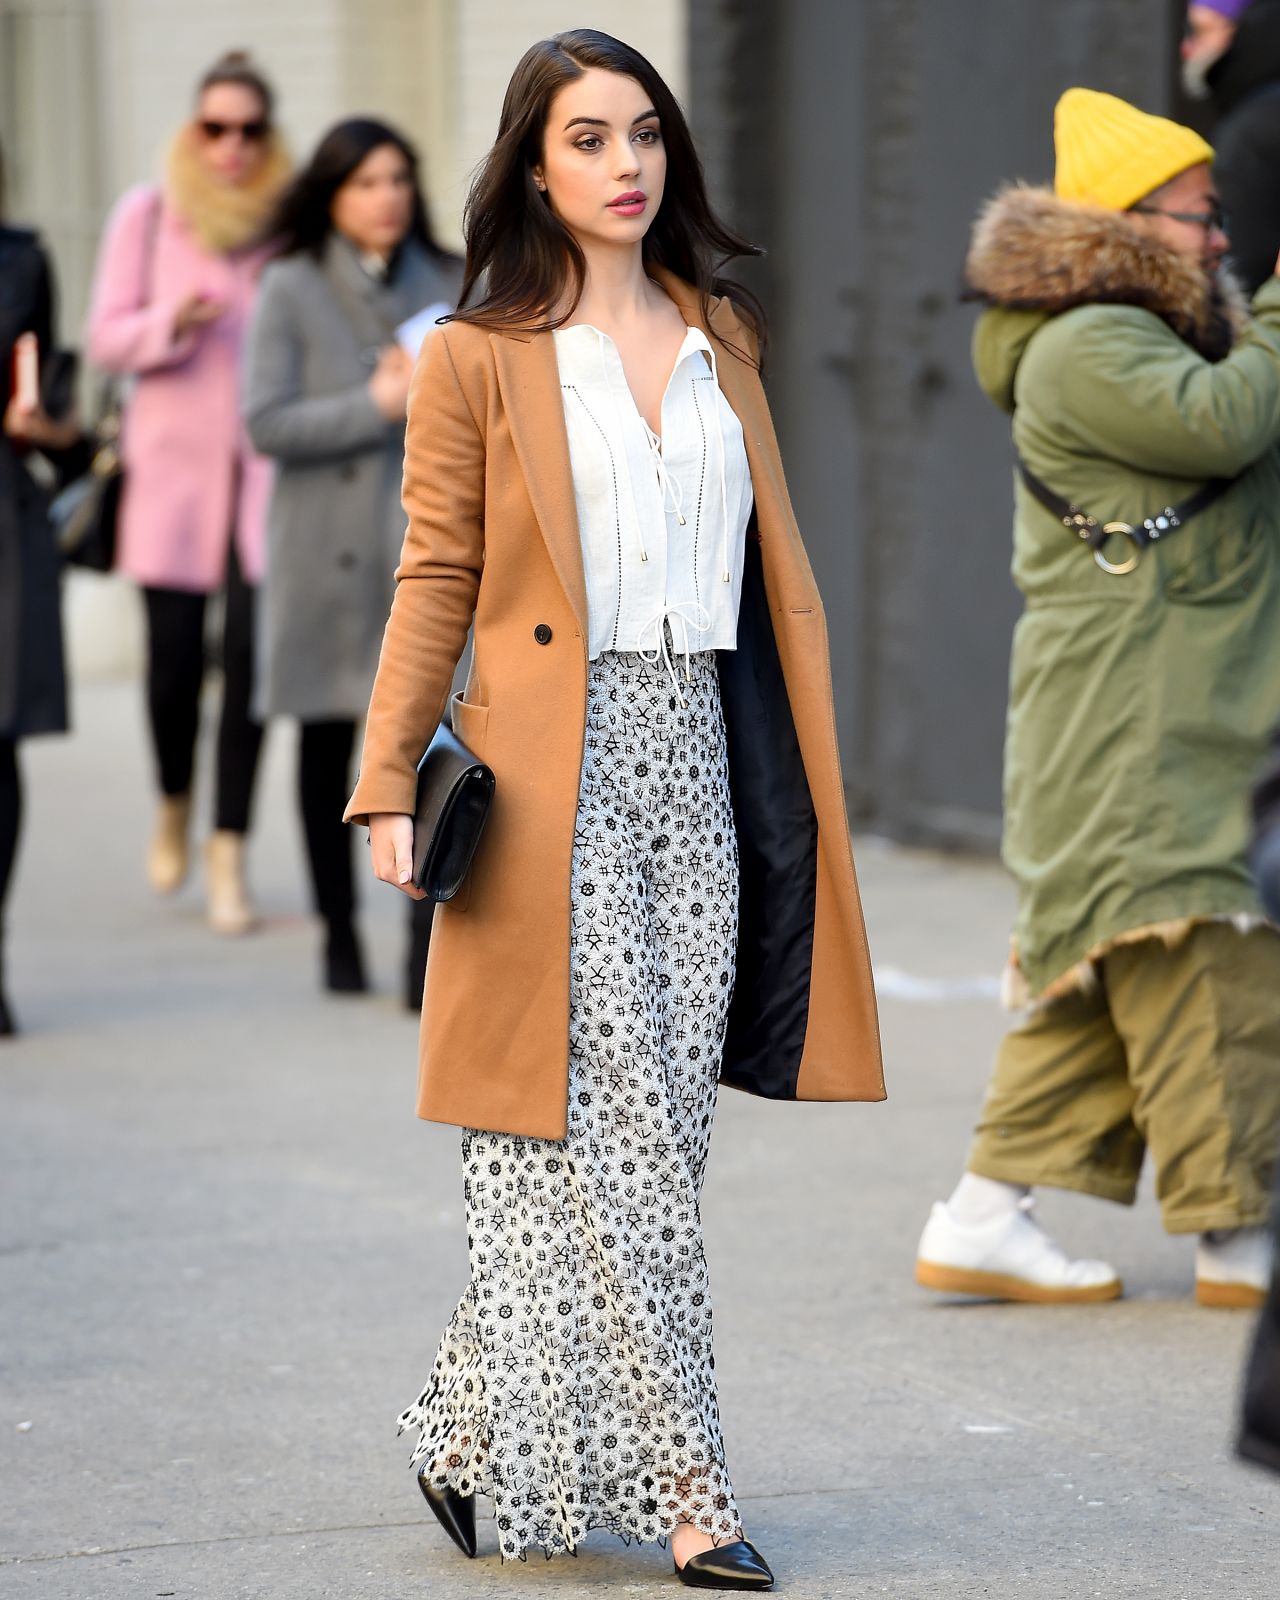 Adelaide Kane Casual Style - Out in New York City 2/12/2016